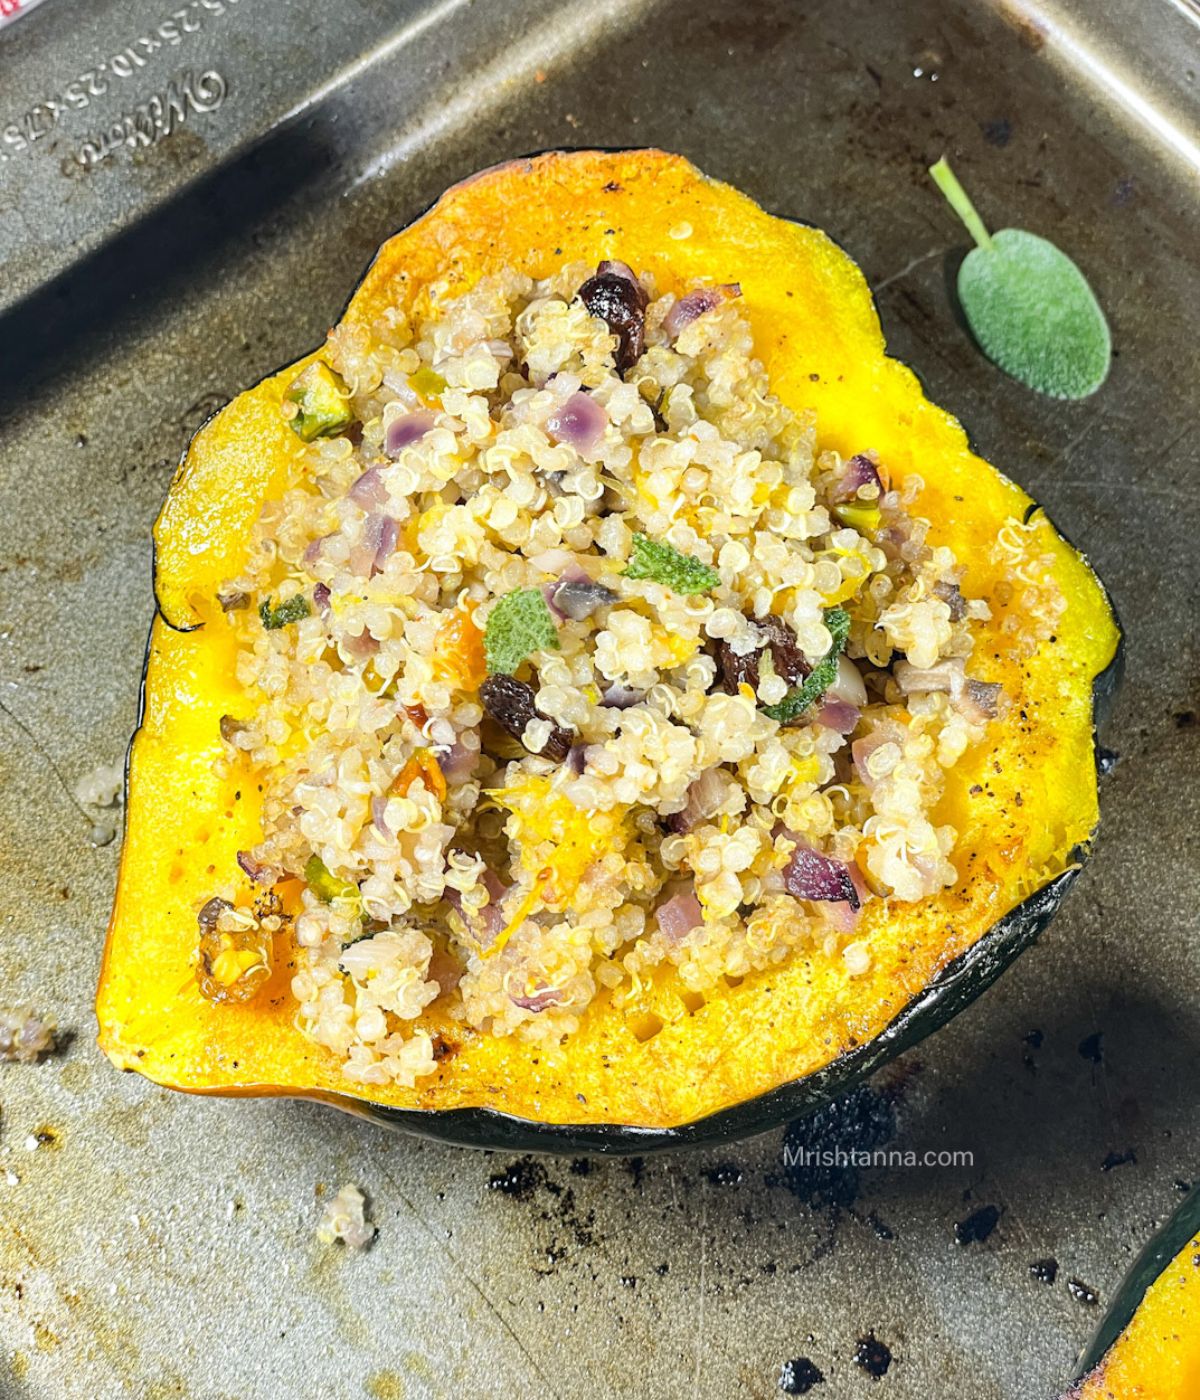 On the  baking tray is quinoa stuffed with acorn squash.